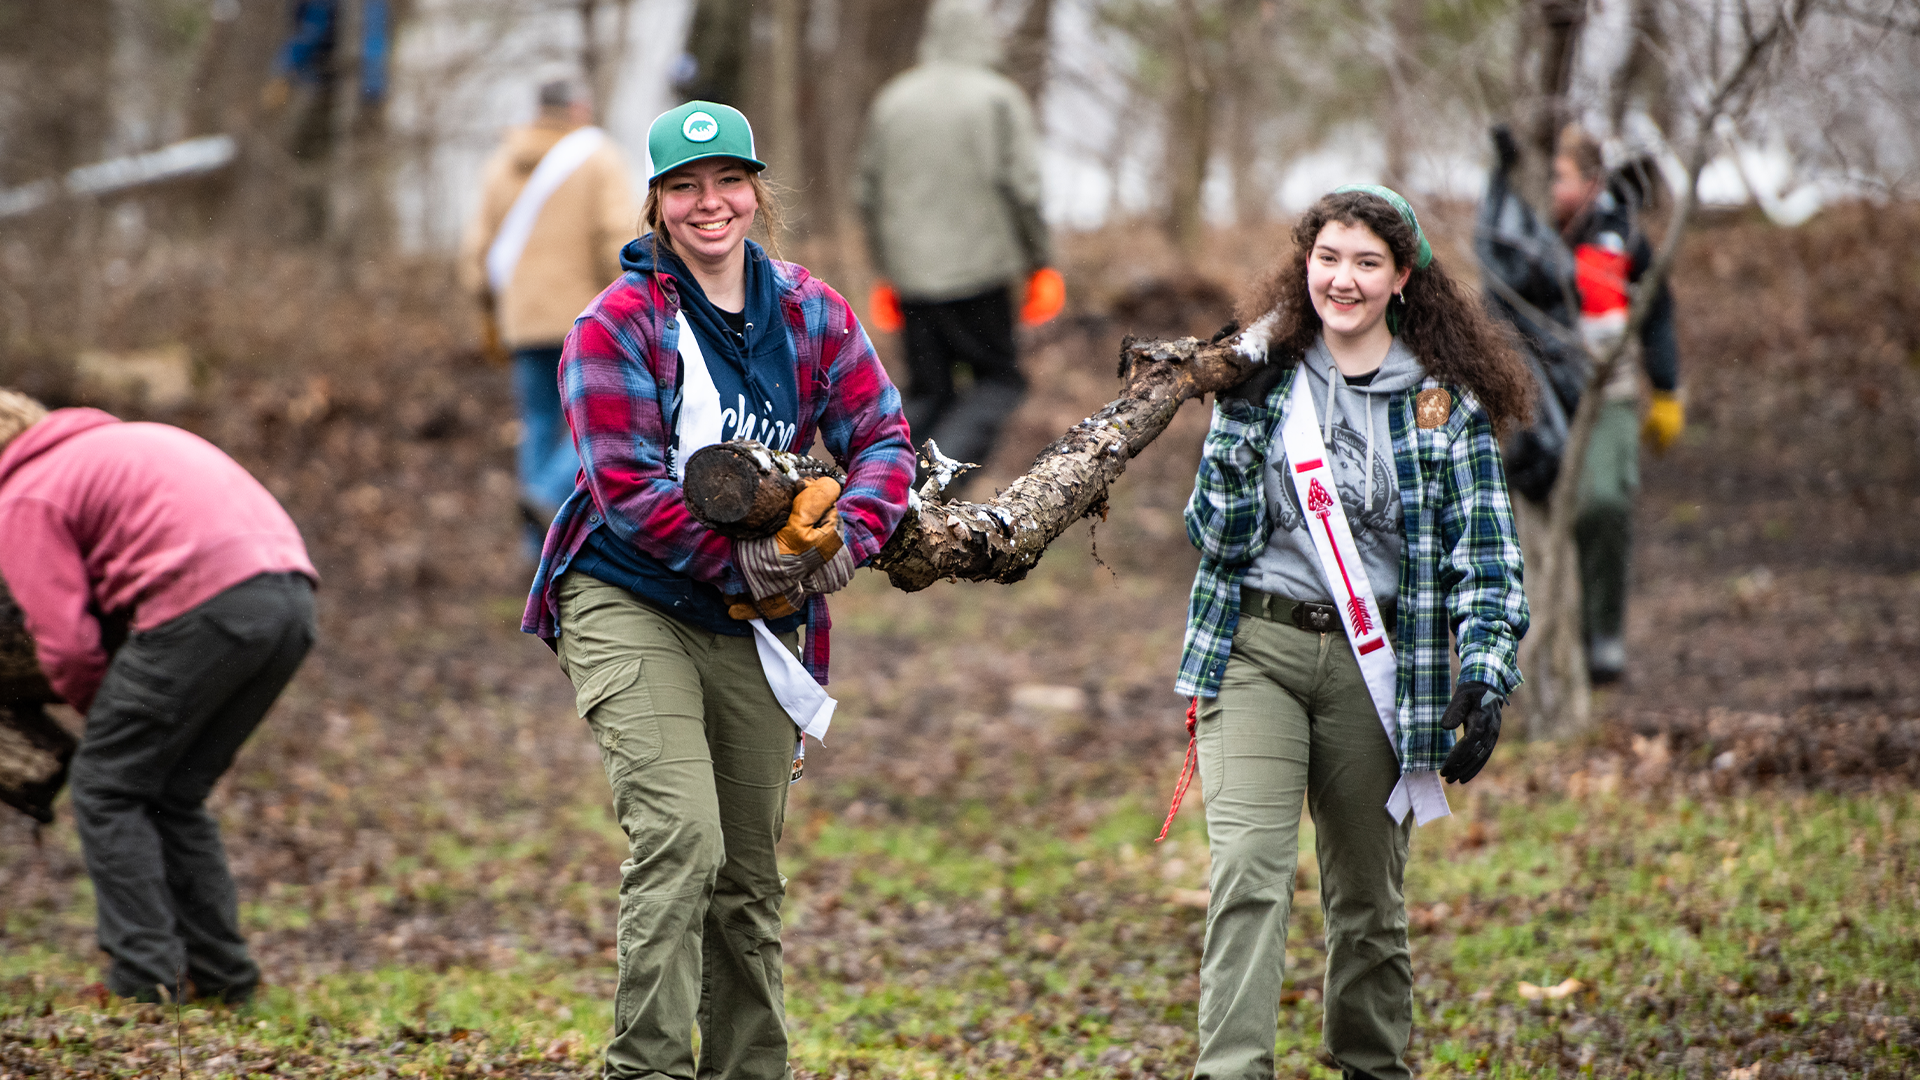 Two female Scouts wearing OA sashes are smiling while carrying a large tree branch as part of a cleanup project. Four other people are seen in the background also working on cleaning up.